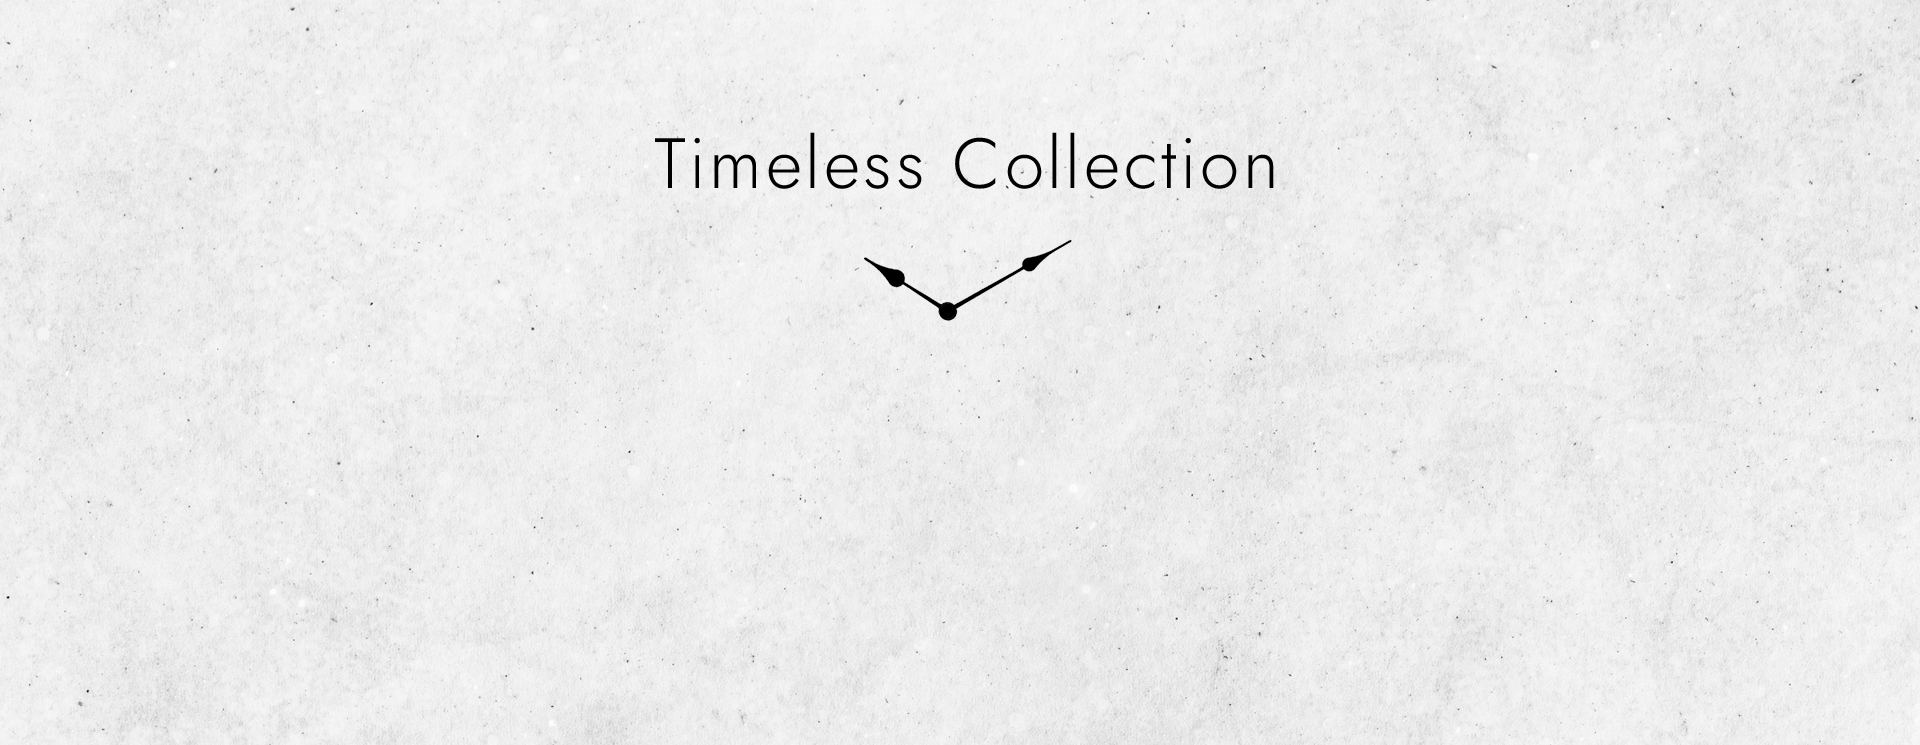 Timeless collection